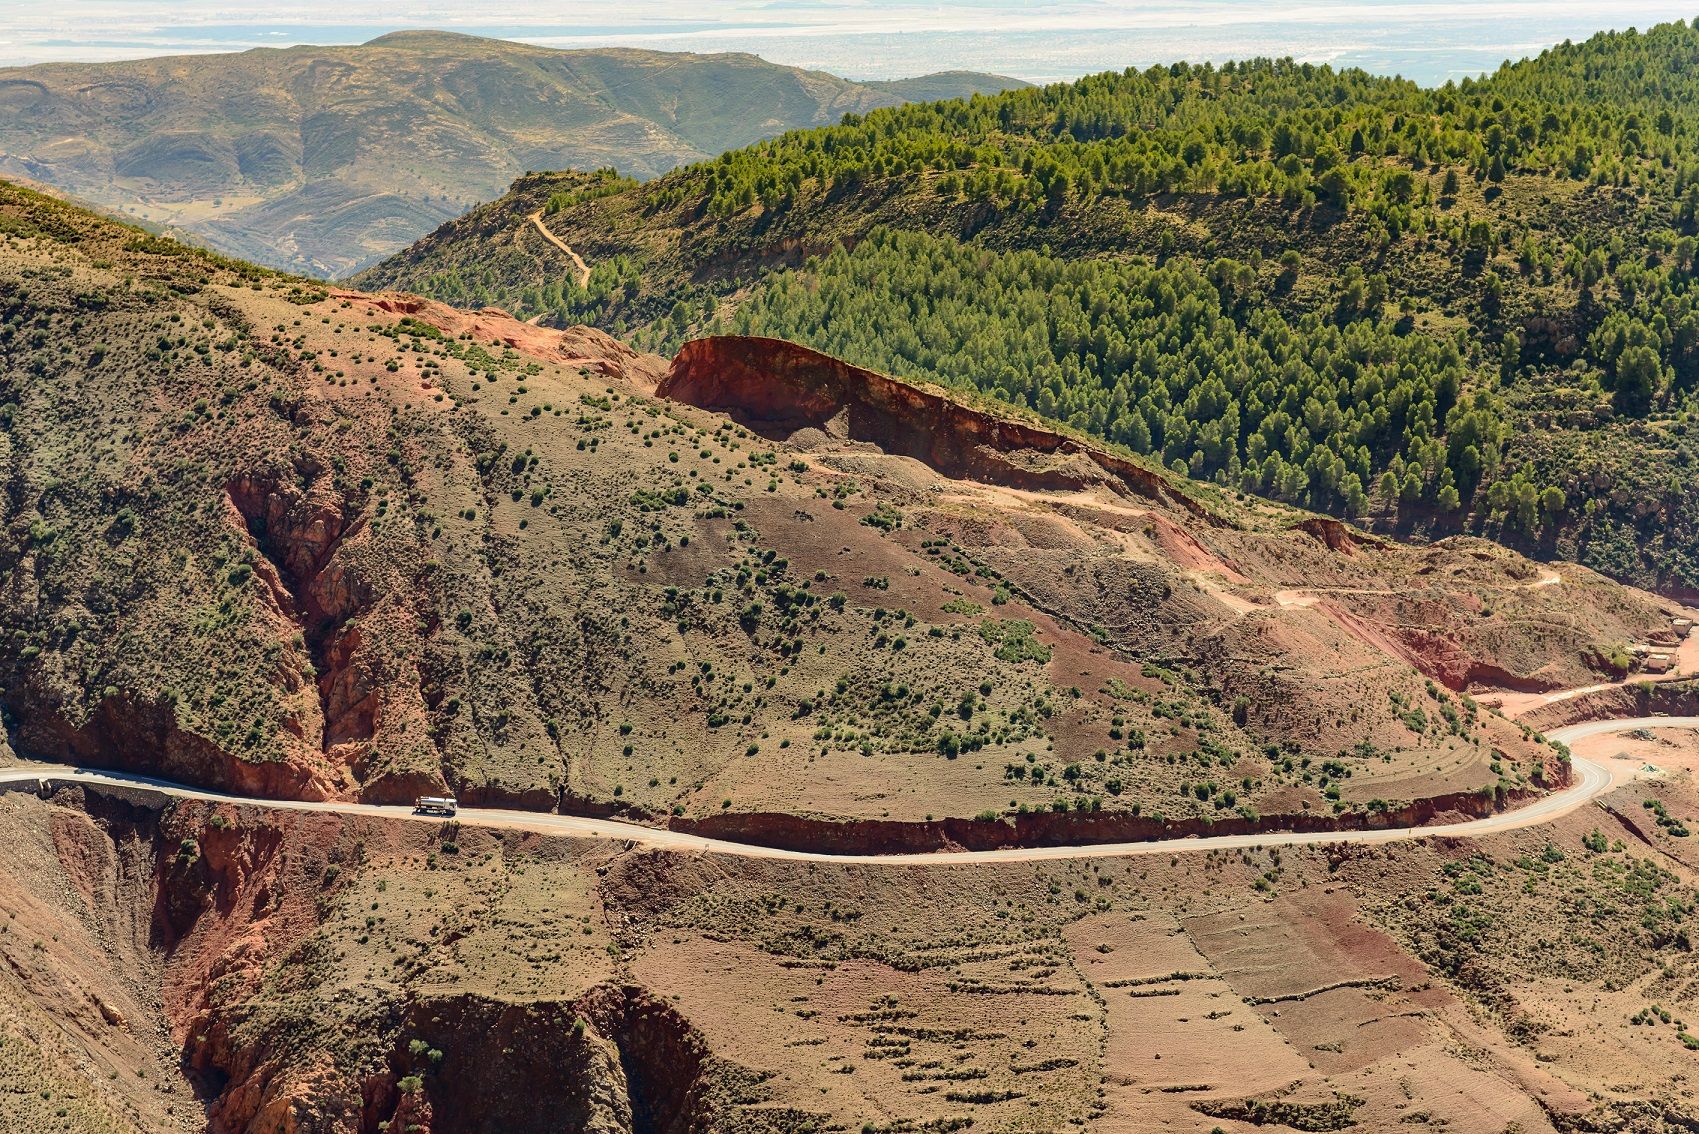 A winding mountain road in Morocco